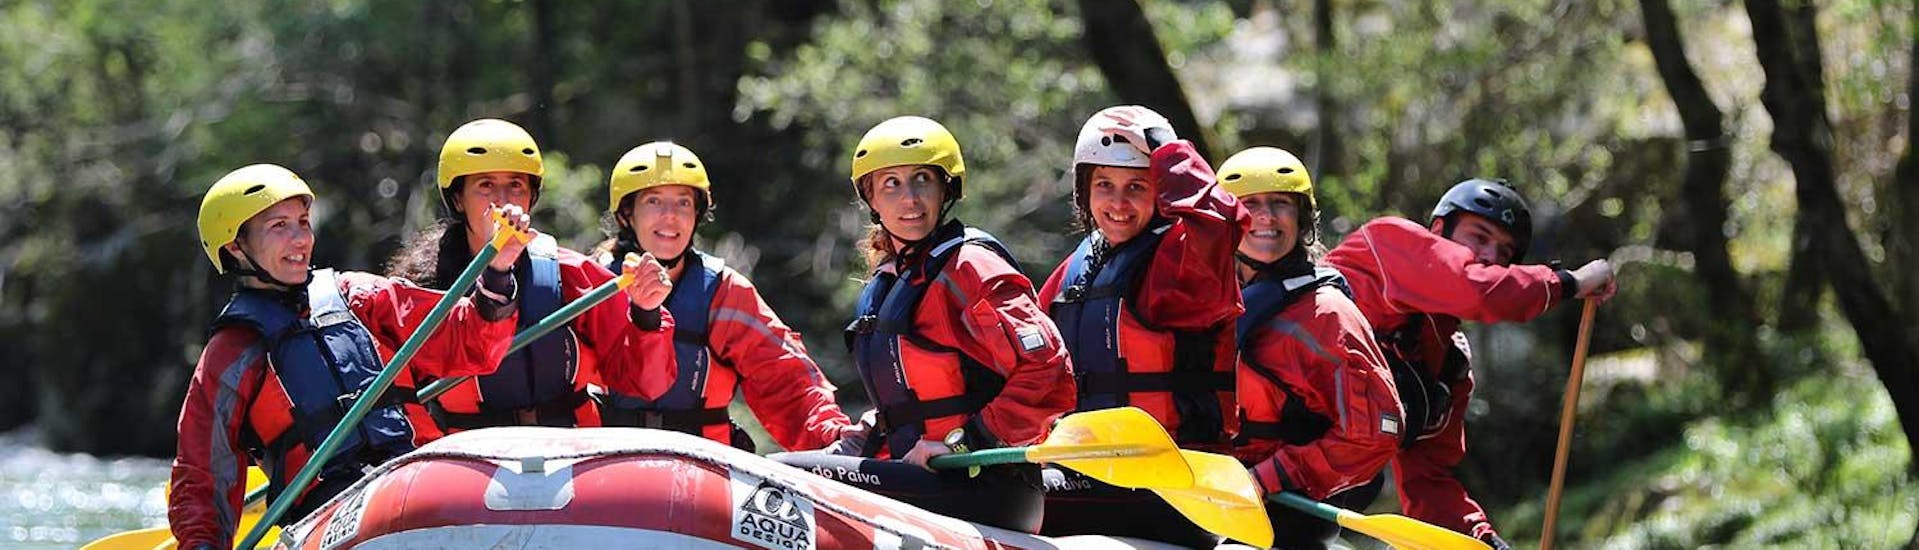 The participants of the Class II Rafting on Rio Paiva in Arouca Geopark	with Clube do Paiva are enjoying the calm waters of the river as they raft through the stunning natural scenery.